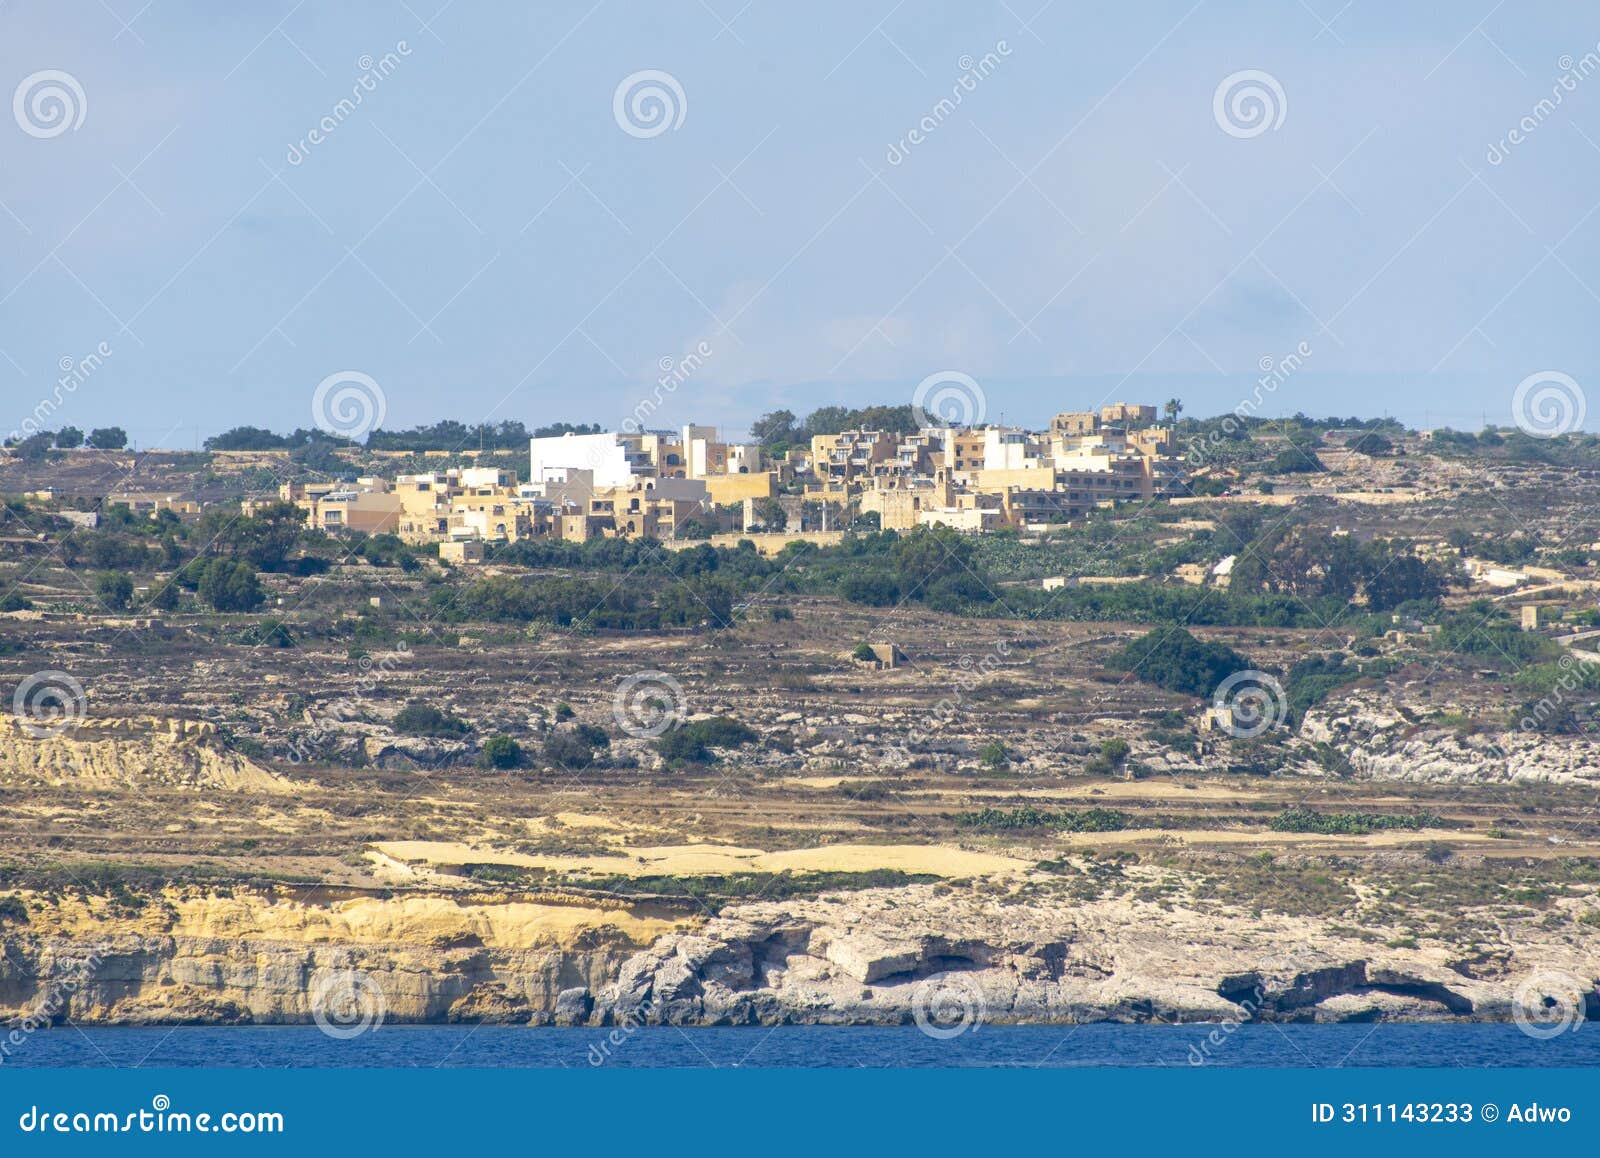 town of qala